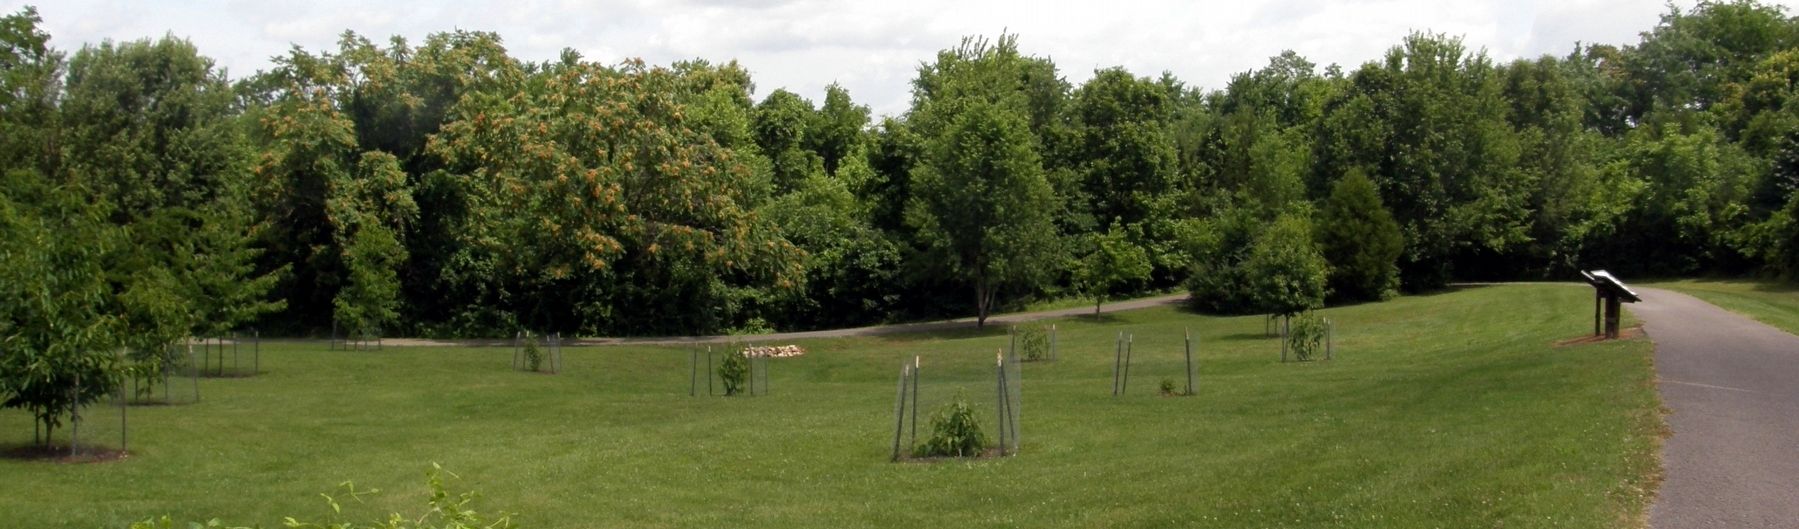 The experimental grove of “Restoration Chestnut 1.0”. image. Click for full size.